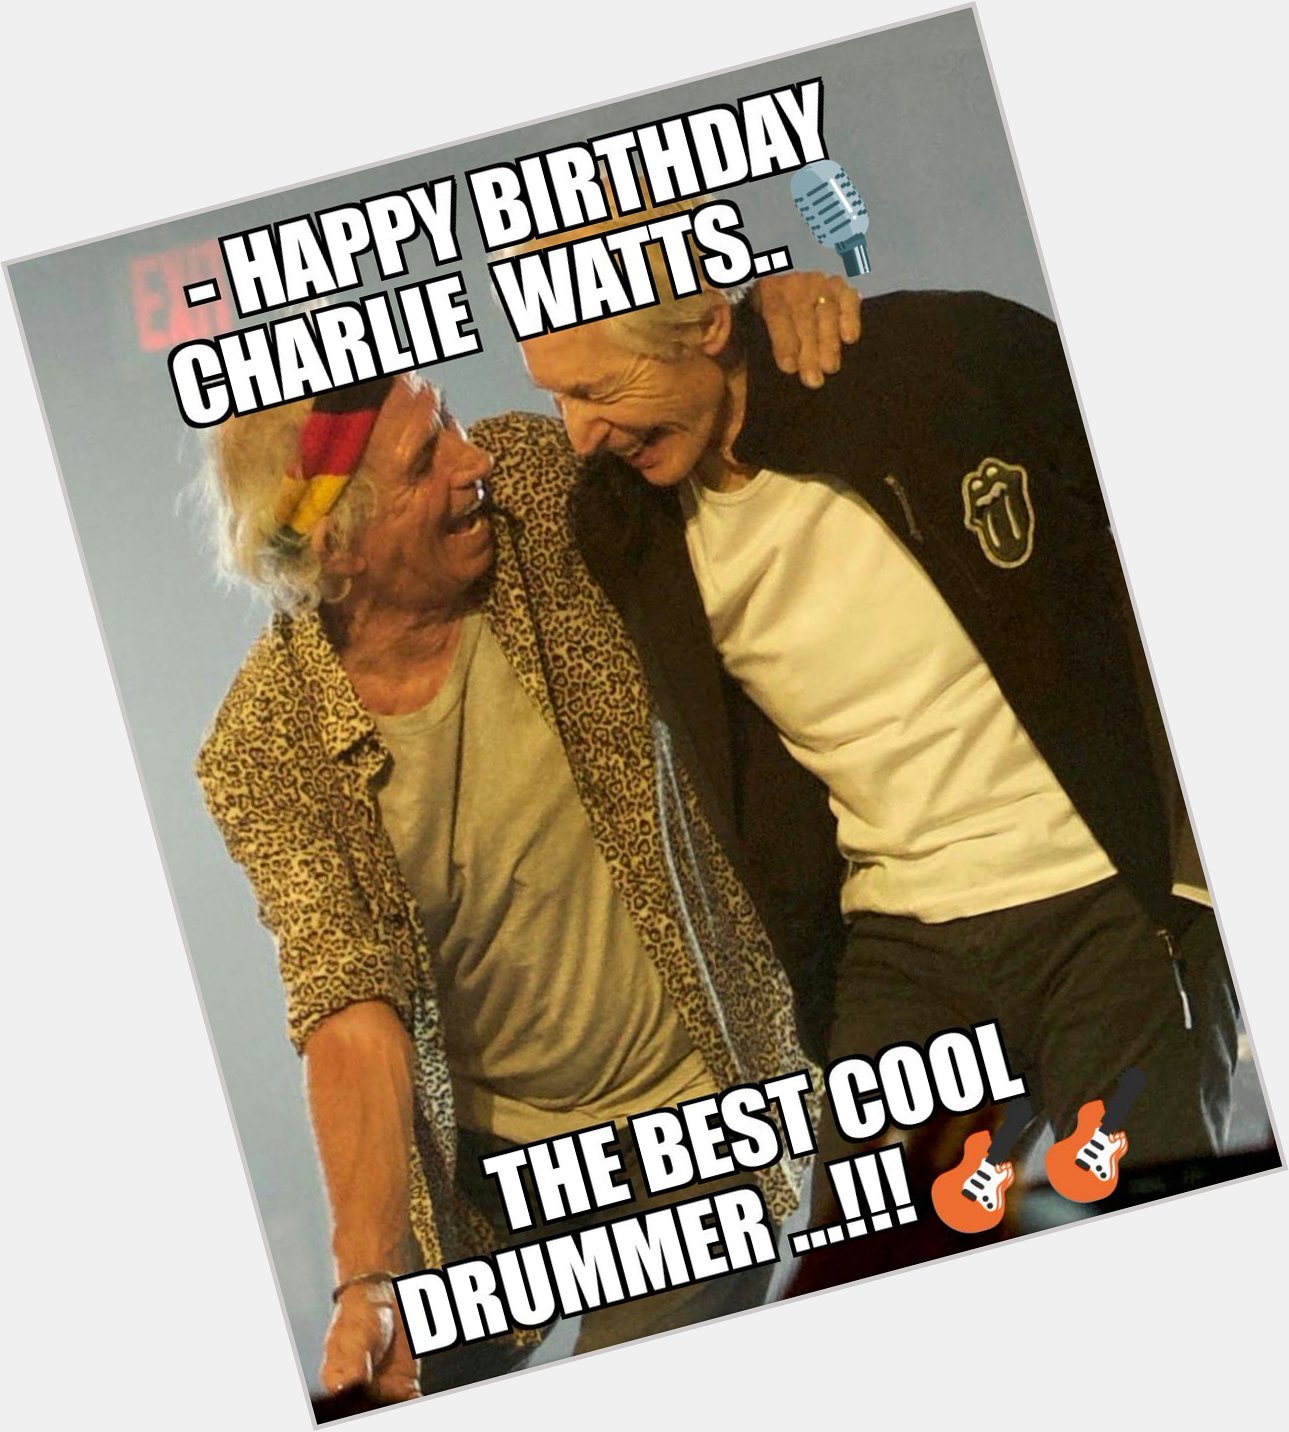 - HAPPY BIRTHDAY Mister CHARLIE WATTS... a GOOD TIME....STONES for EVER...  